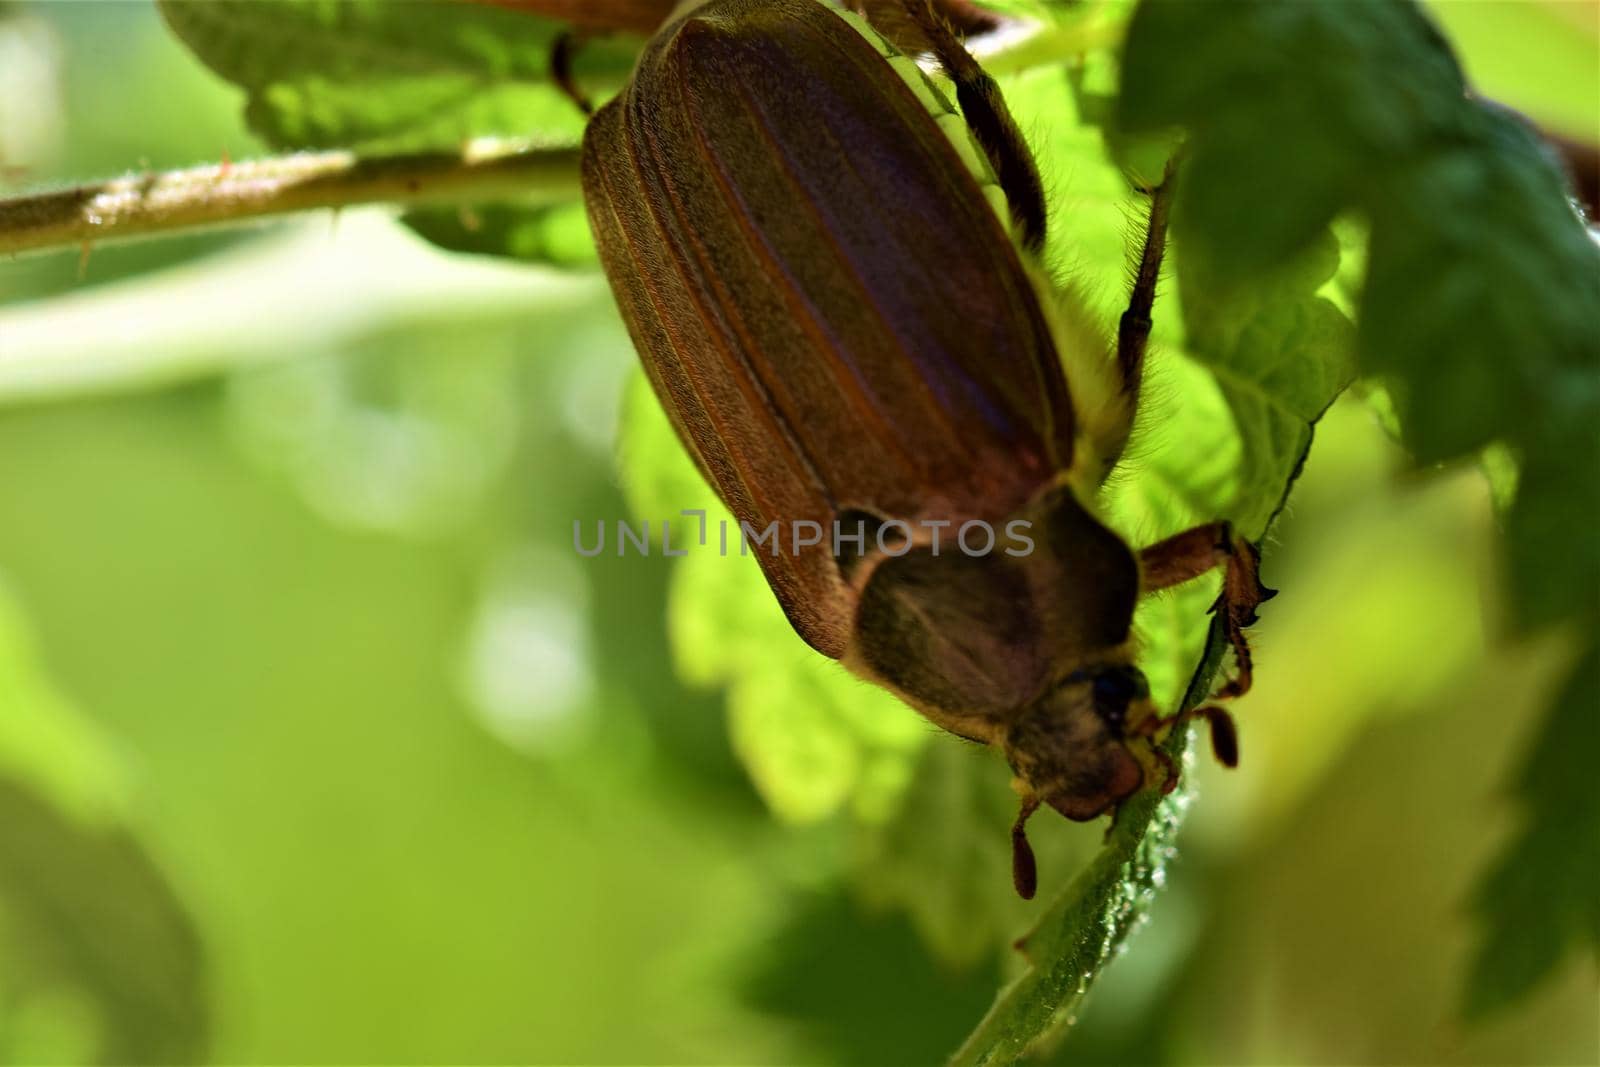 A may beetle sits under a raspberry leaf by Luise123